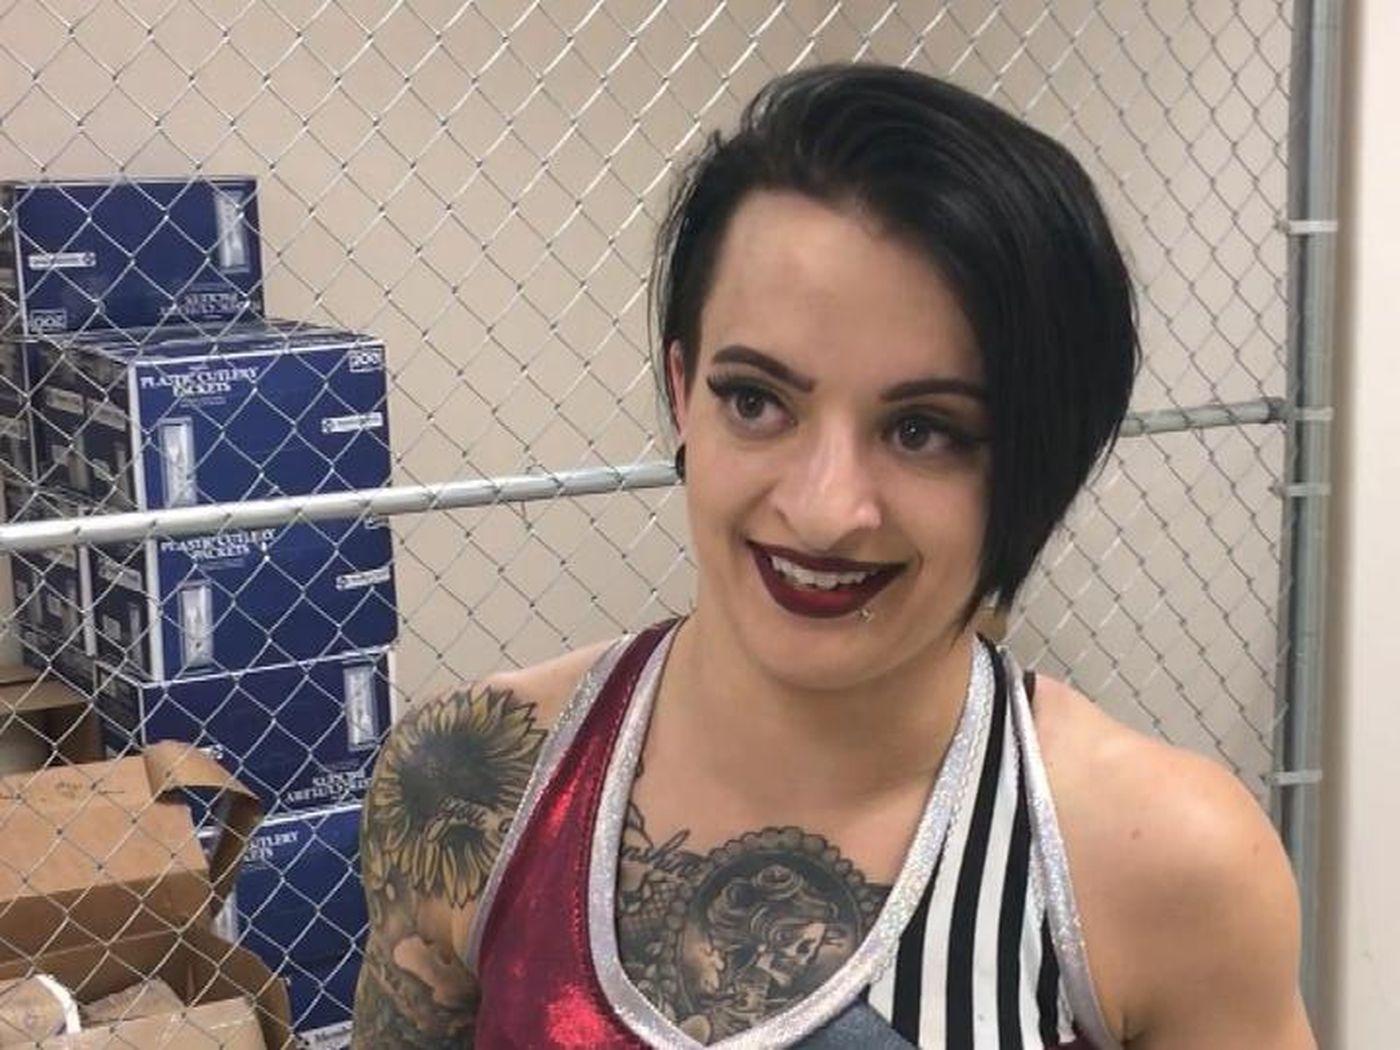 Ruby Riot introduces herself to WWE, says she's 'here to show Nikki